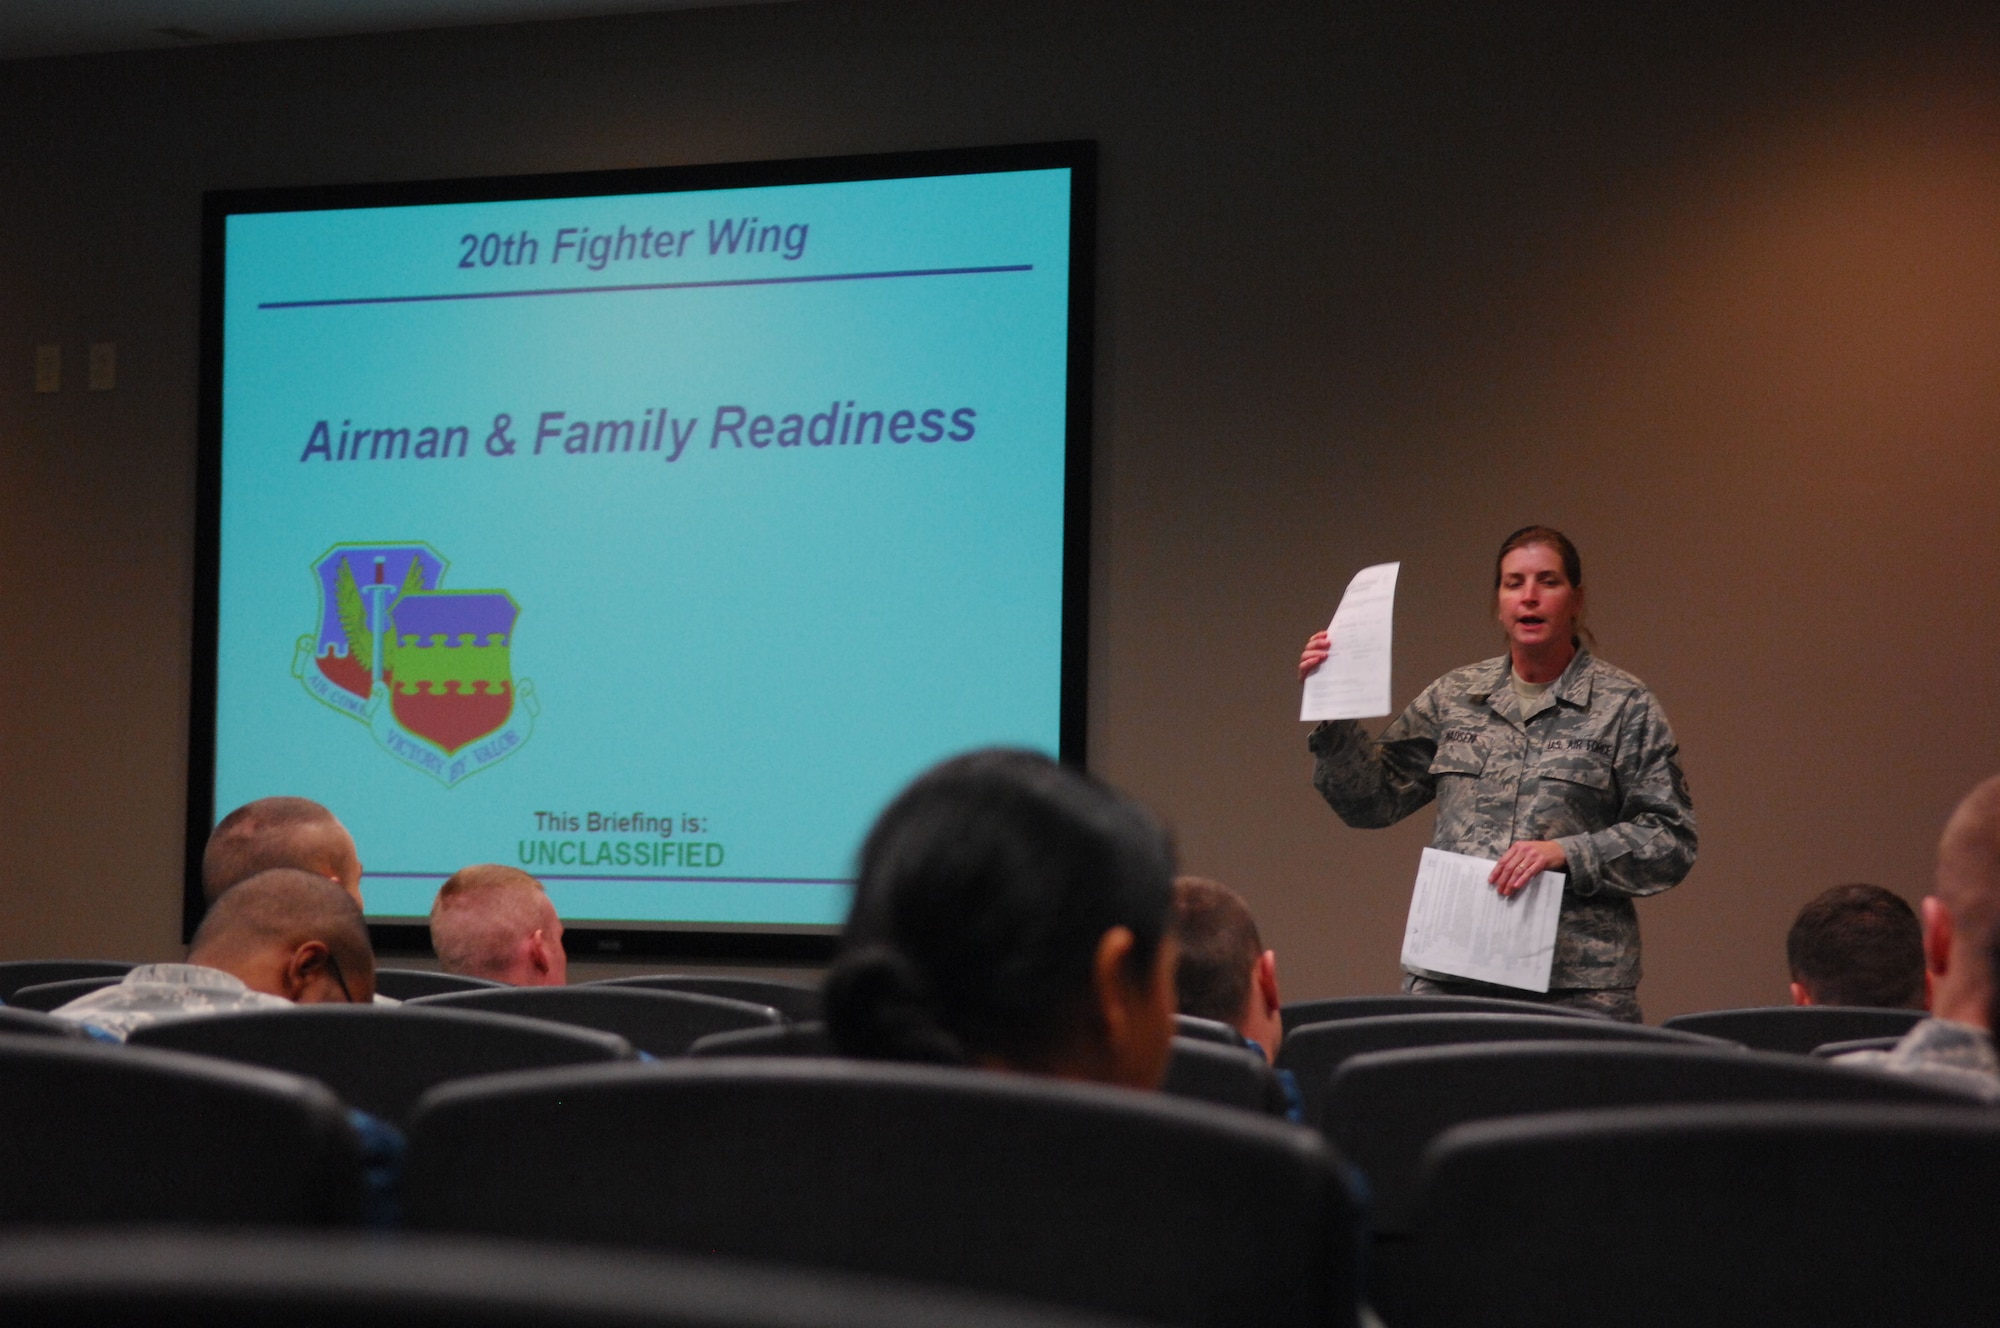 SHAW AIR FORCE BASE, S.C. -- Master Sgt. Marsha Madsen, 20th Force Support Squadron, briefs Airmen of the 77th Aircraft Maintenance Squadron about the Year of the Air Force Family and DePLAYment Program during their pre-deployment briefing Jan. 12. The DePLAYment Program offers many services for deployed member's families to support them while their loved ones are deployed. The DePLAYment package can be picked up at the Airman and Family Readiness Center here. (U.S. Air Force photo/Staff Sgt. John Gordinier)